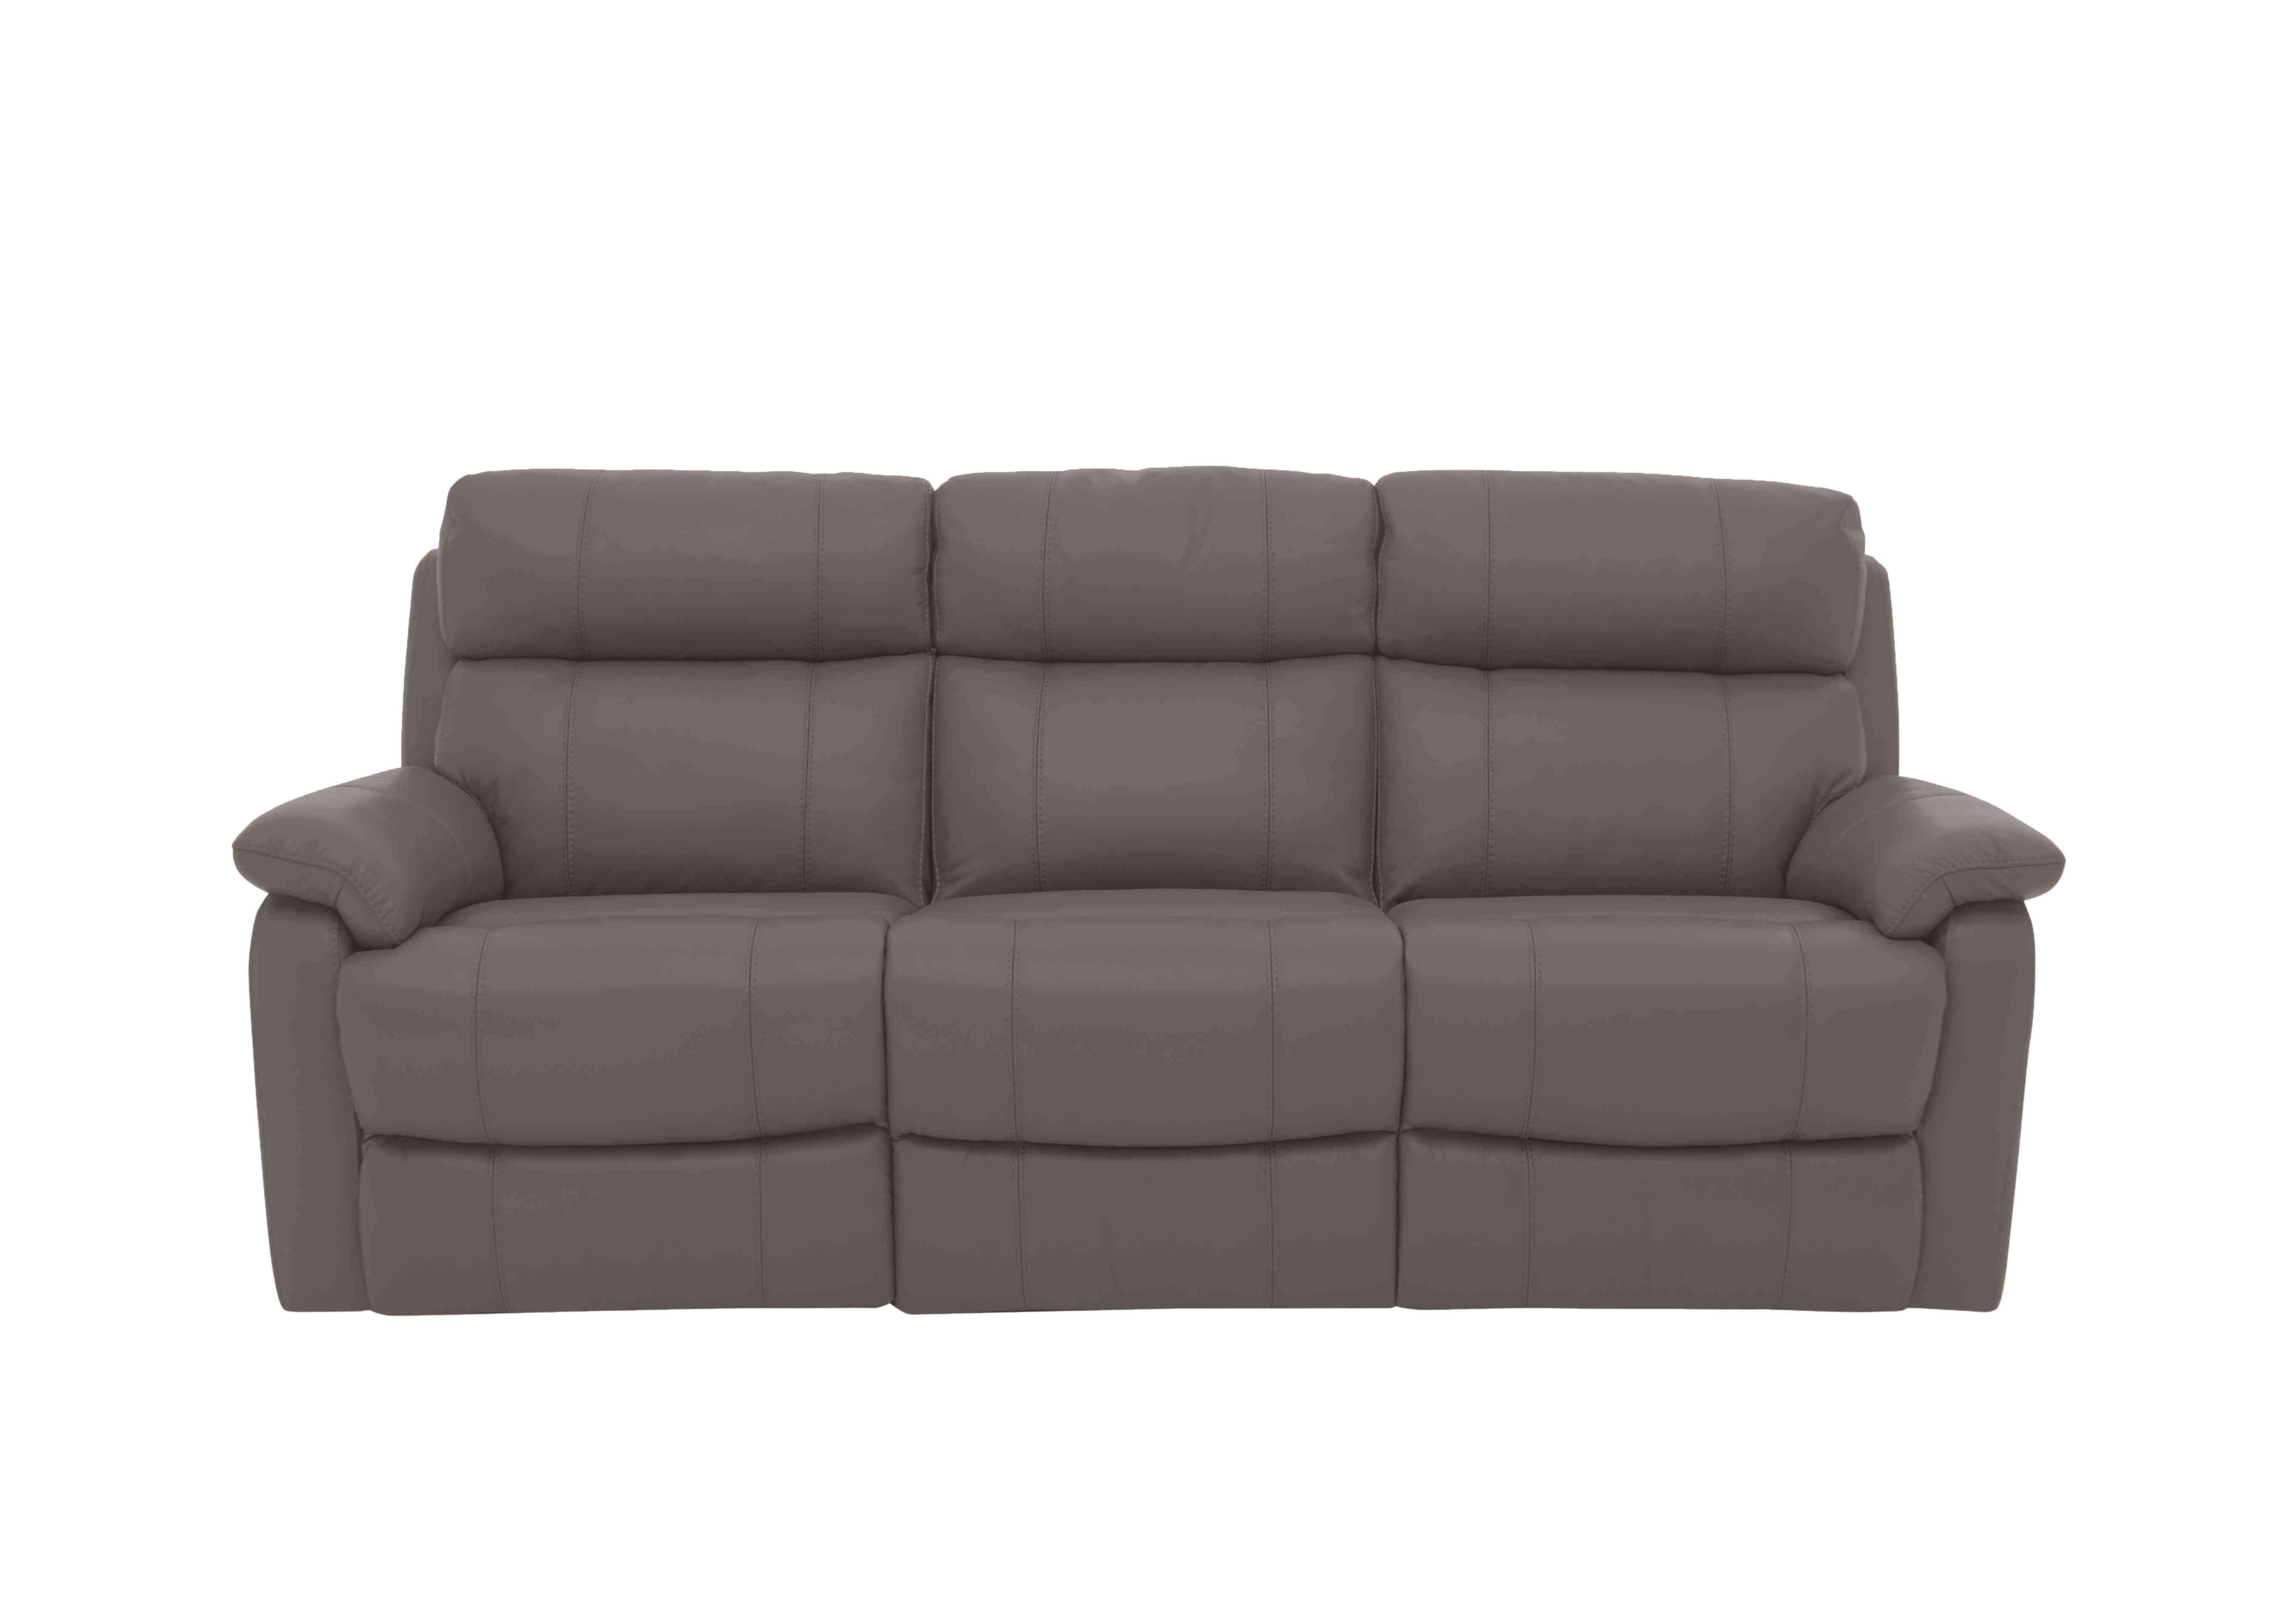 Relax Station Komodo 3 Seater Power Leather Sofa in Nc-042e Elephant on Furniture Village